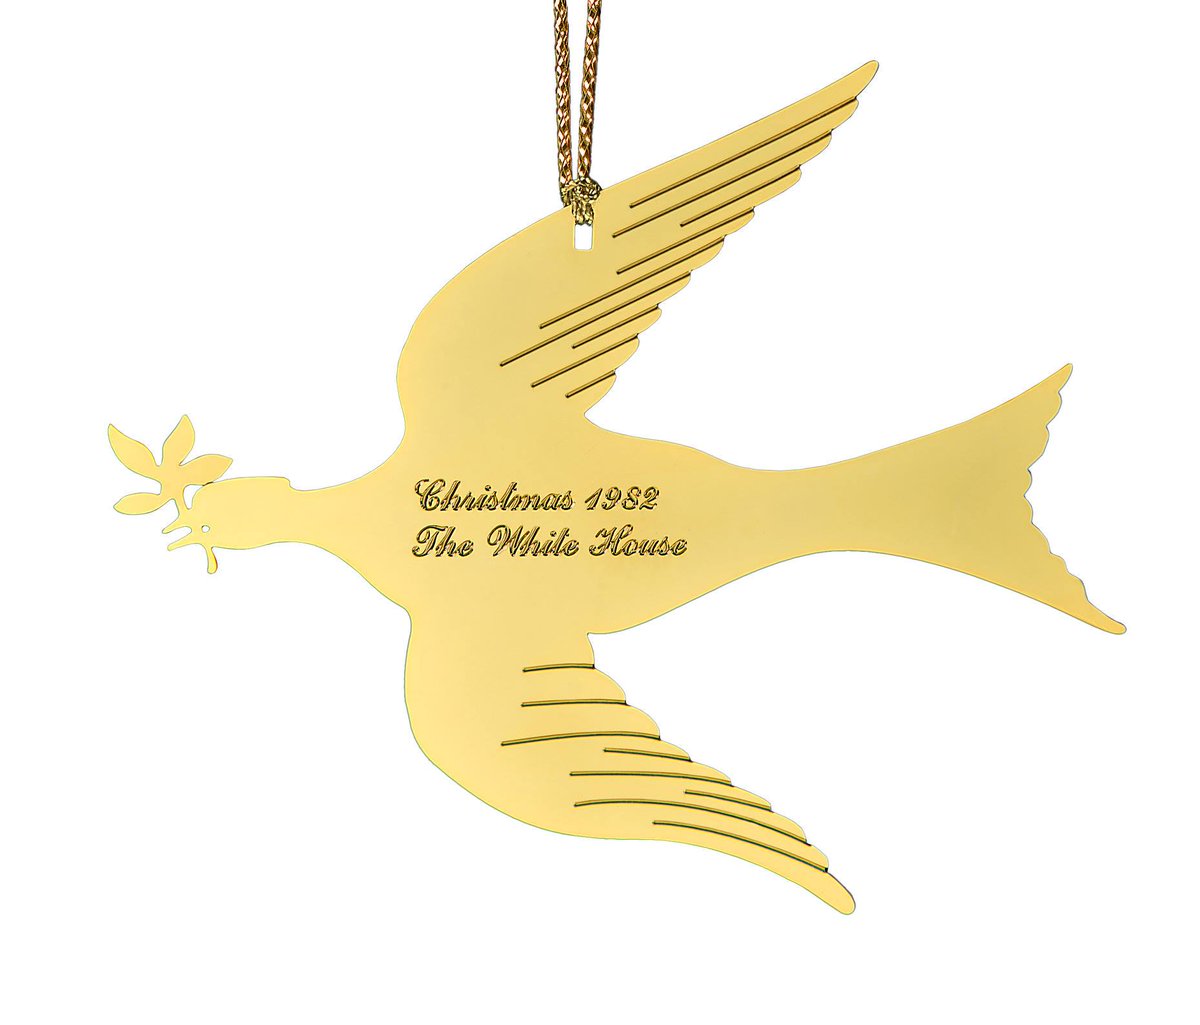 1982's Dove of Peace honors President George Washington. The ornament is a faithful miniature replica of the dove of peace weathervane that Washington commissioned for his home at Mount Vernon. https://shop.whitehousehistory.org/1981-1984-first-four-white-house-ornaments-sold-as-a-set